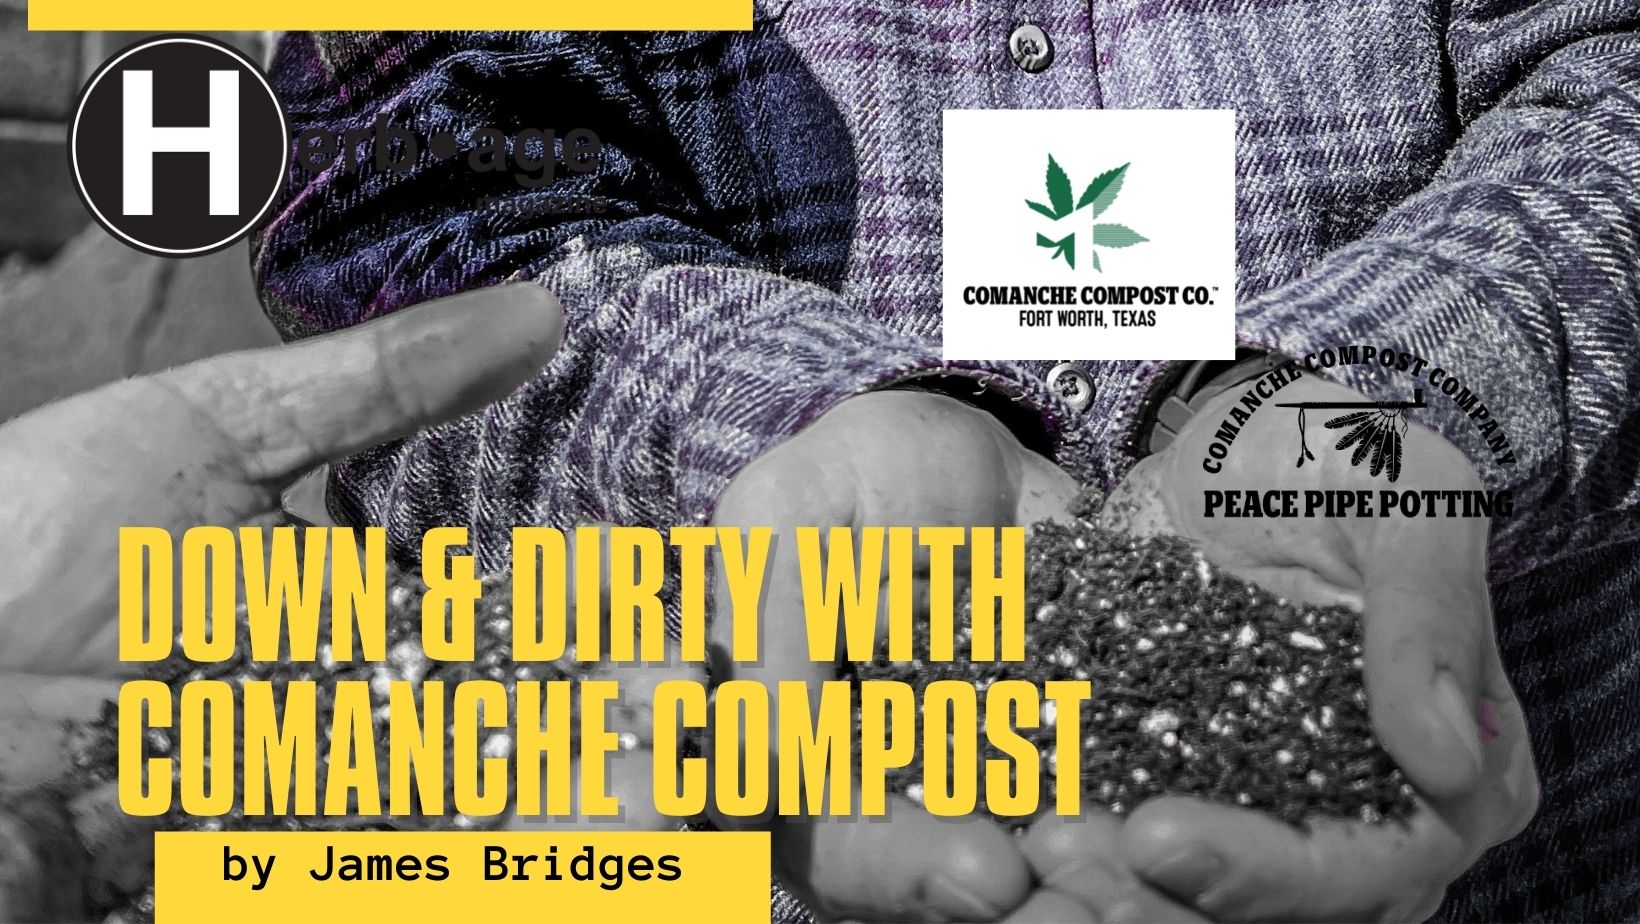 Down & Dirty with Comanche Compost